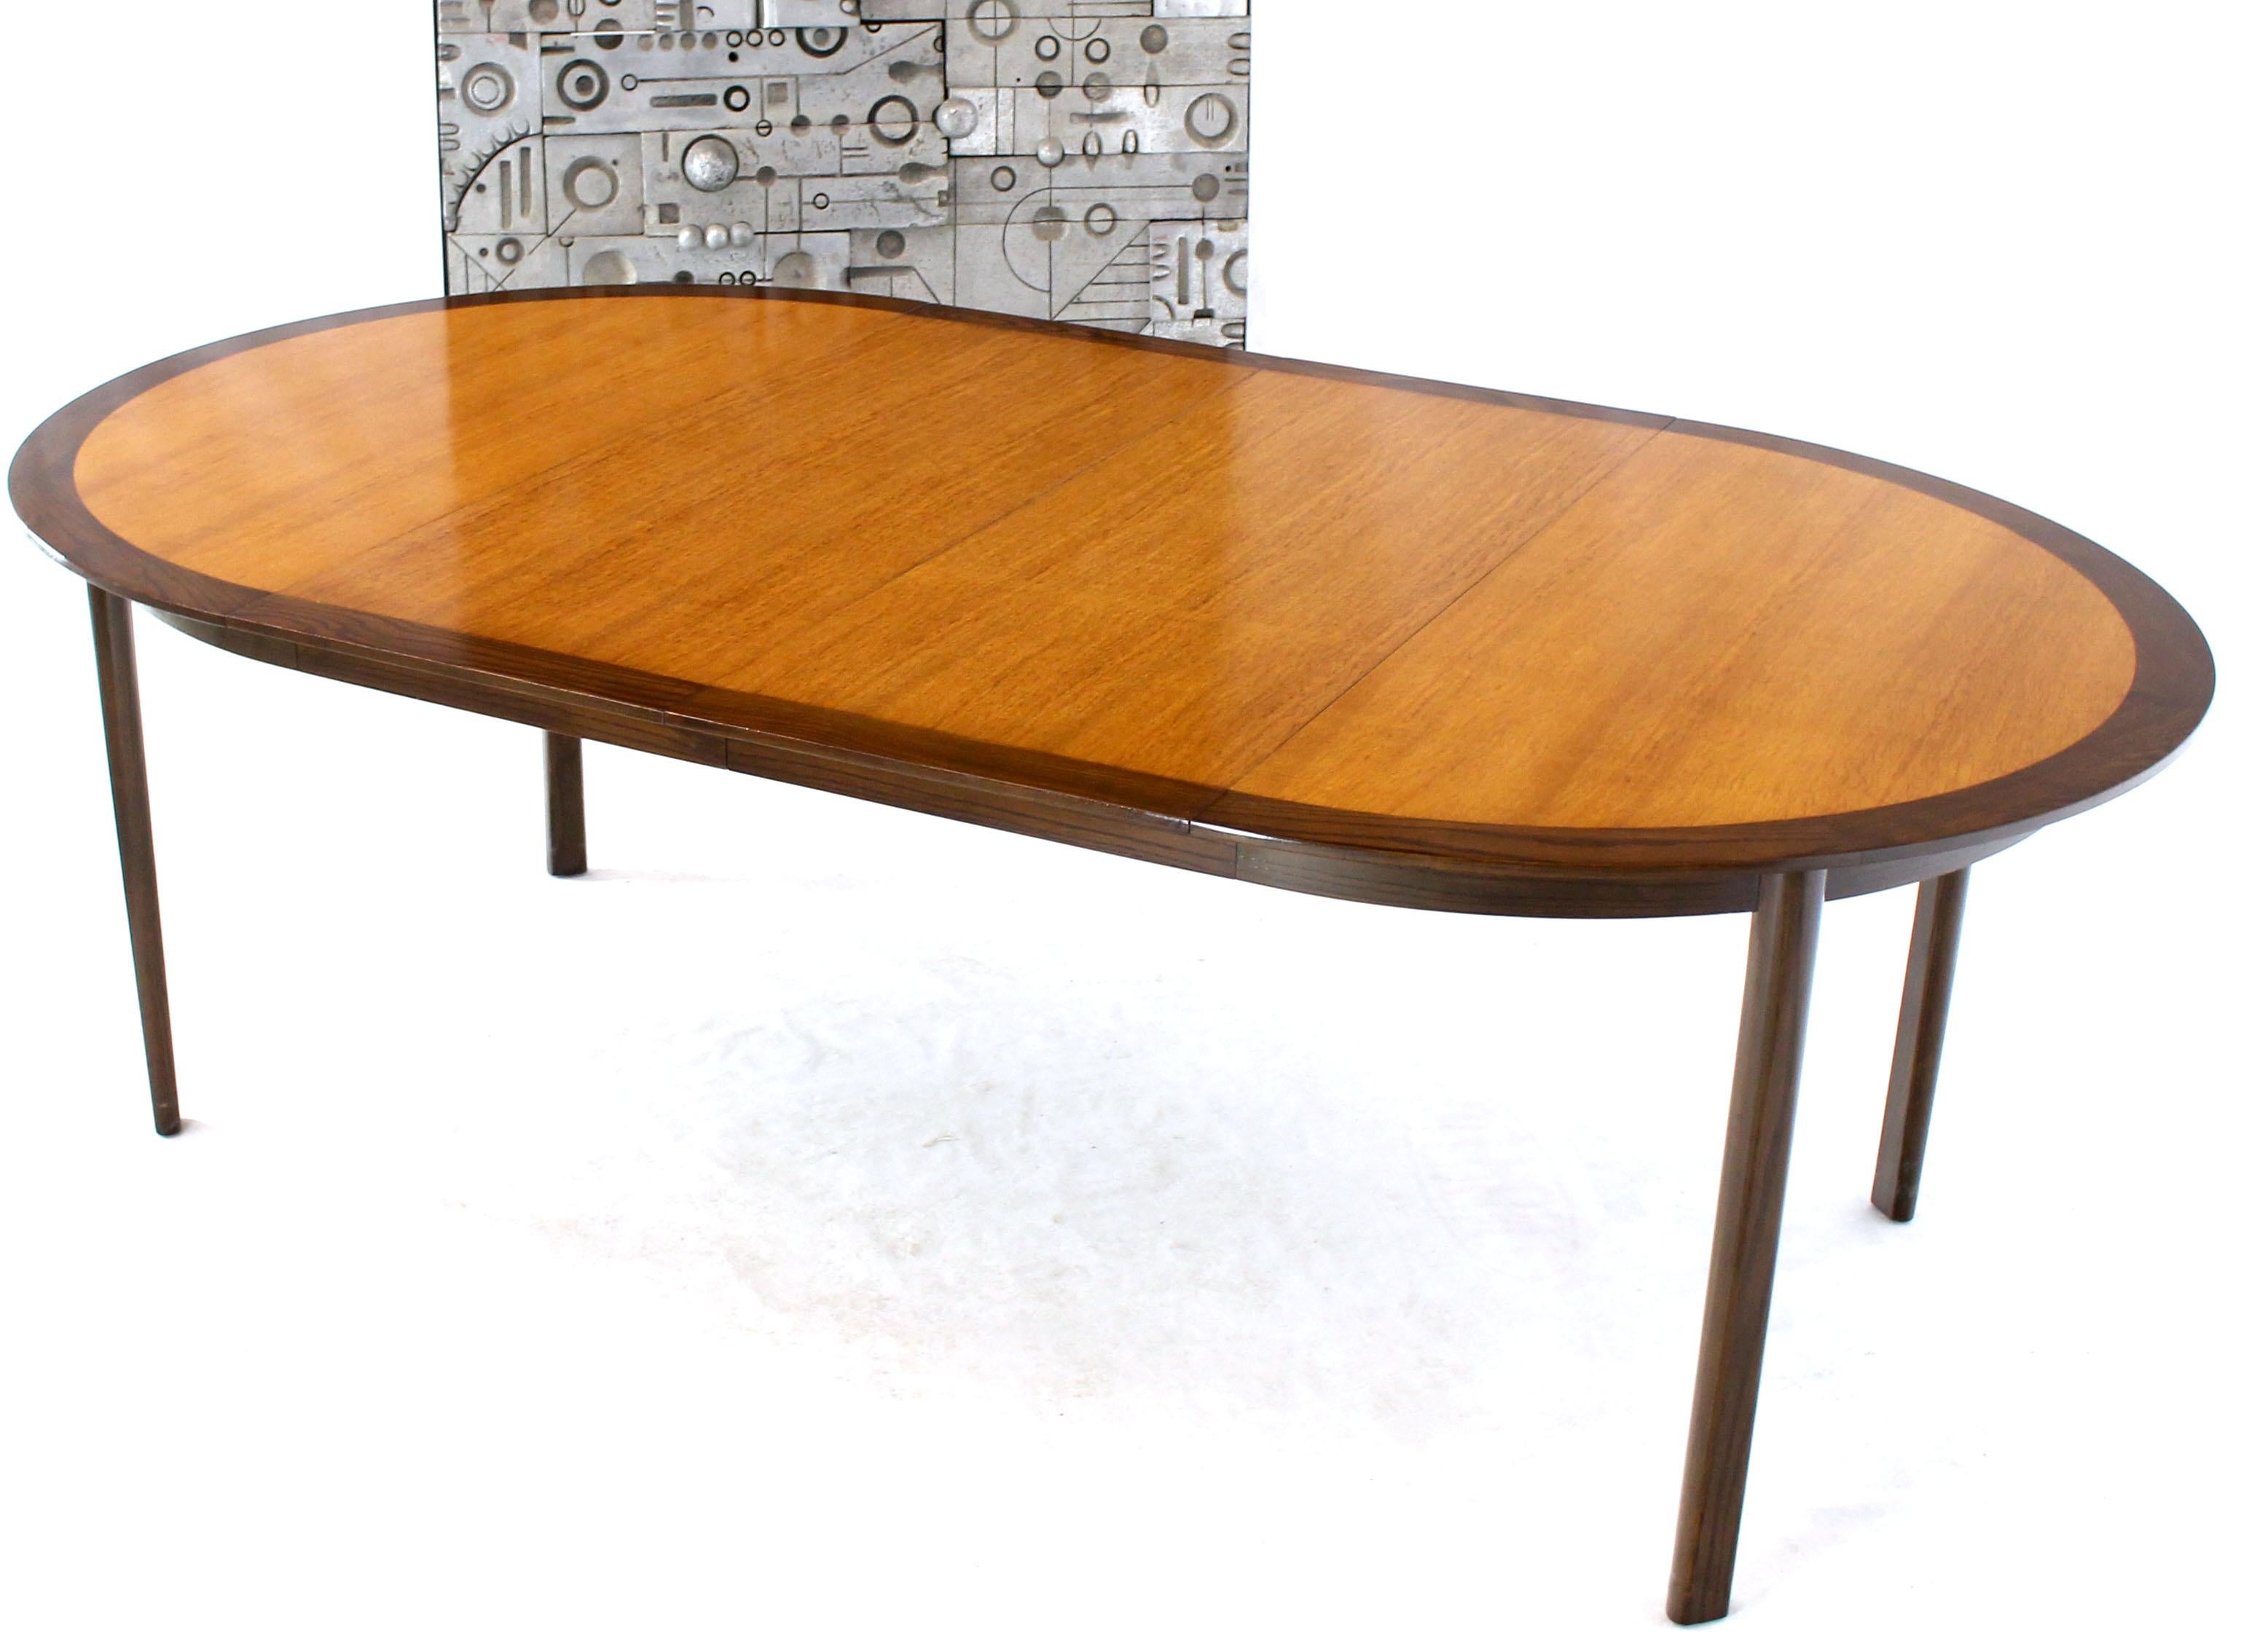 Lacquered Dunbar Two-Tone Light & Dark Walnut Dining Table with Two Leaves